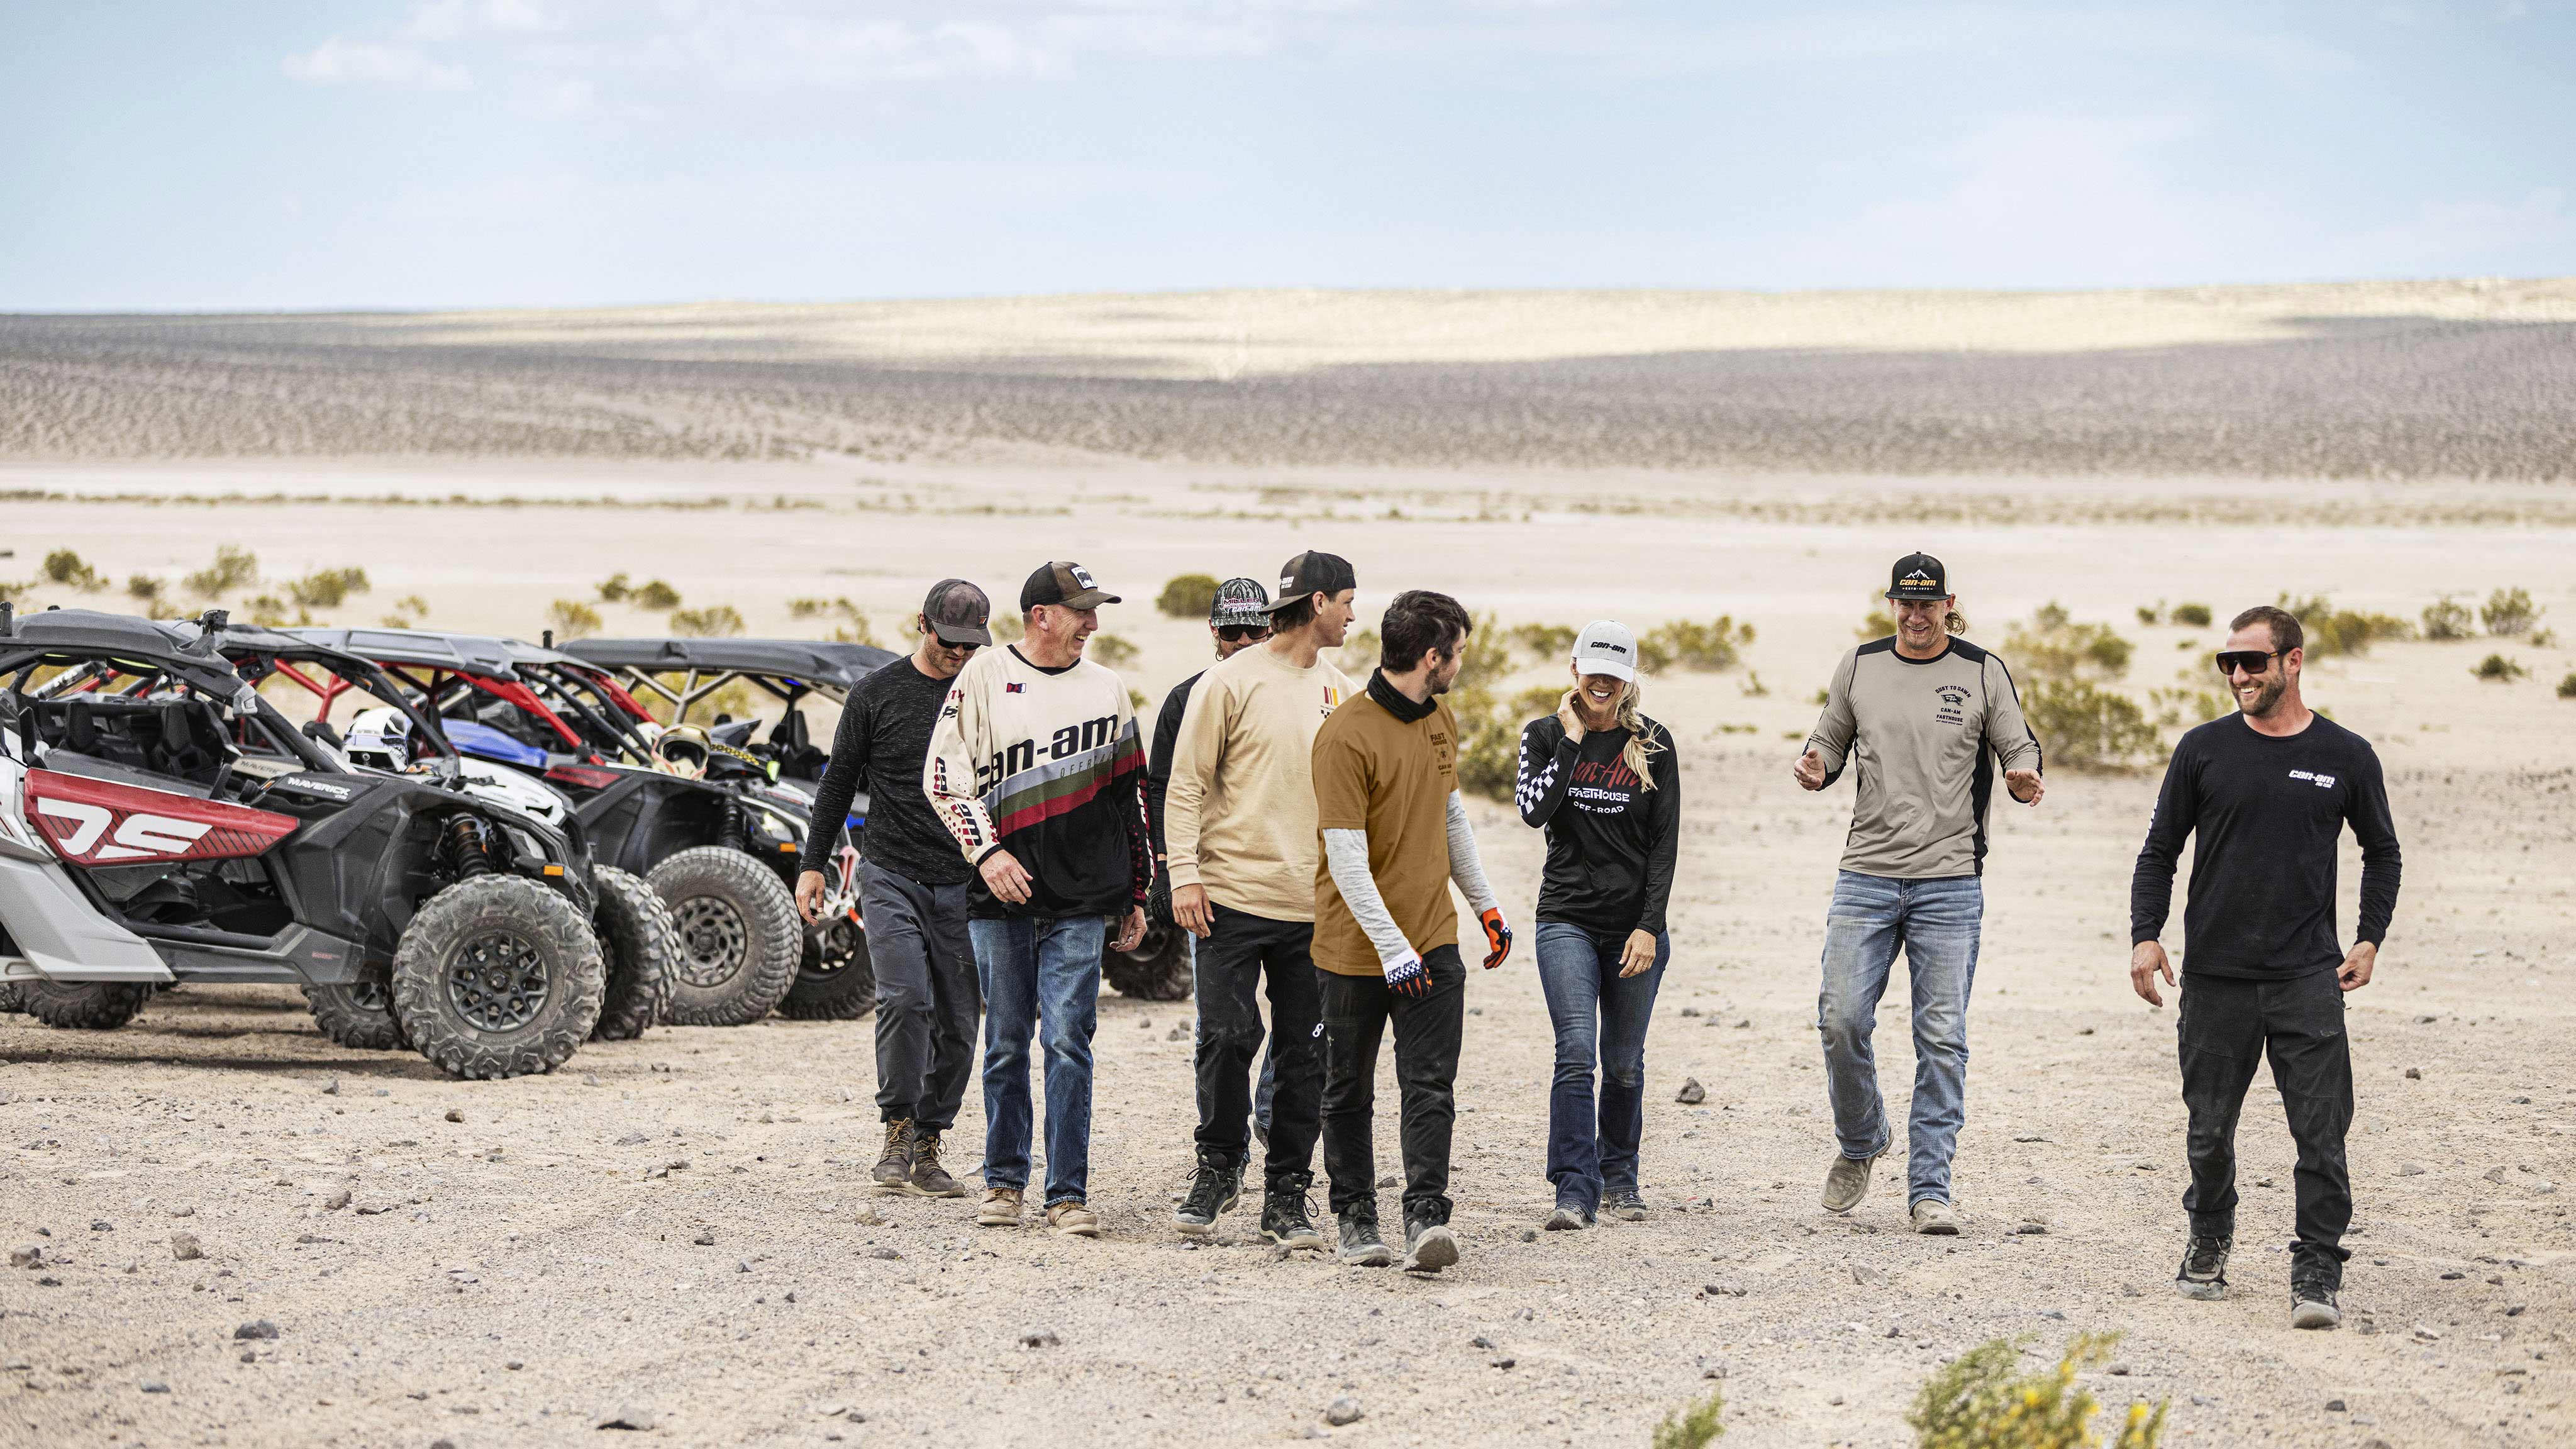 Eight riders walking forwards in the desert, with three Can-Am Maverick vehicles in the background